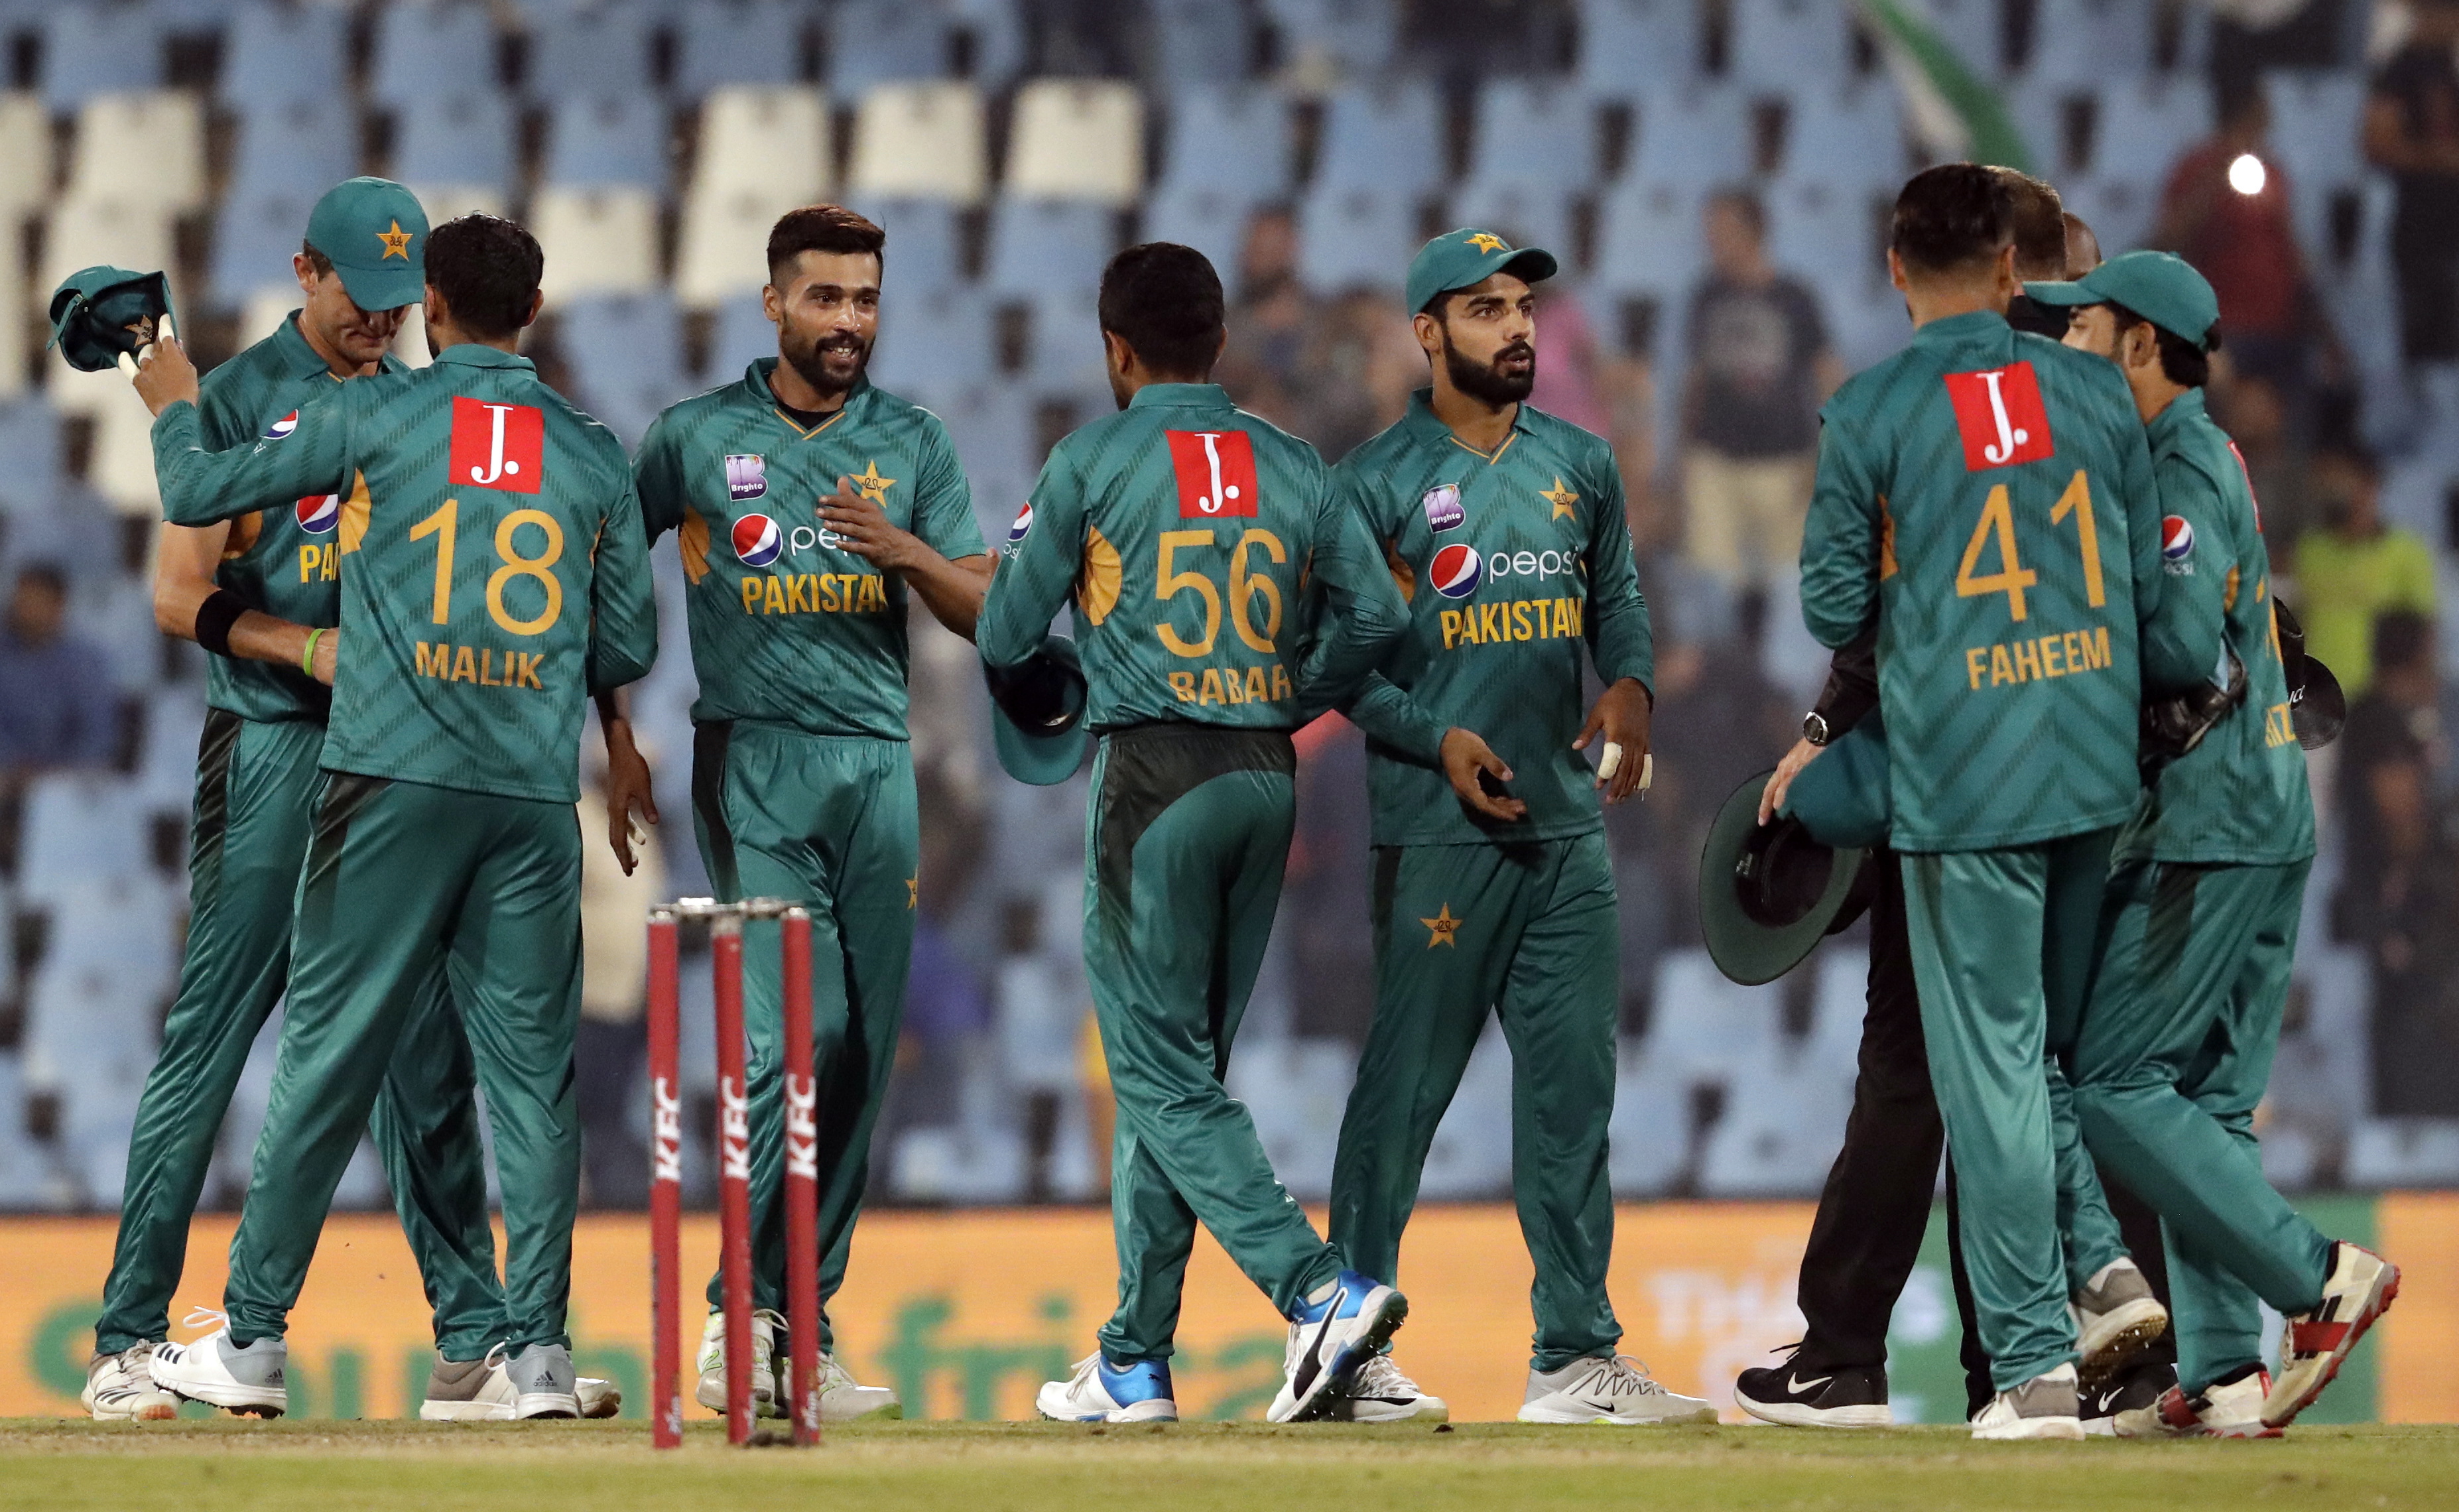 Pakistan wins final T20 against South Africa by 27 runs